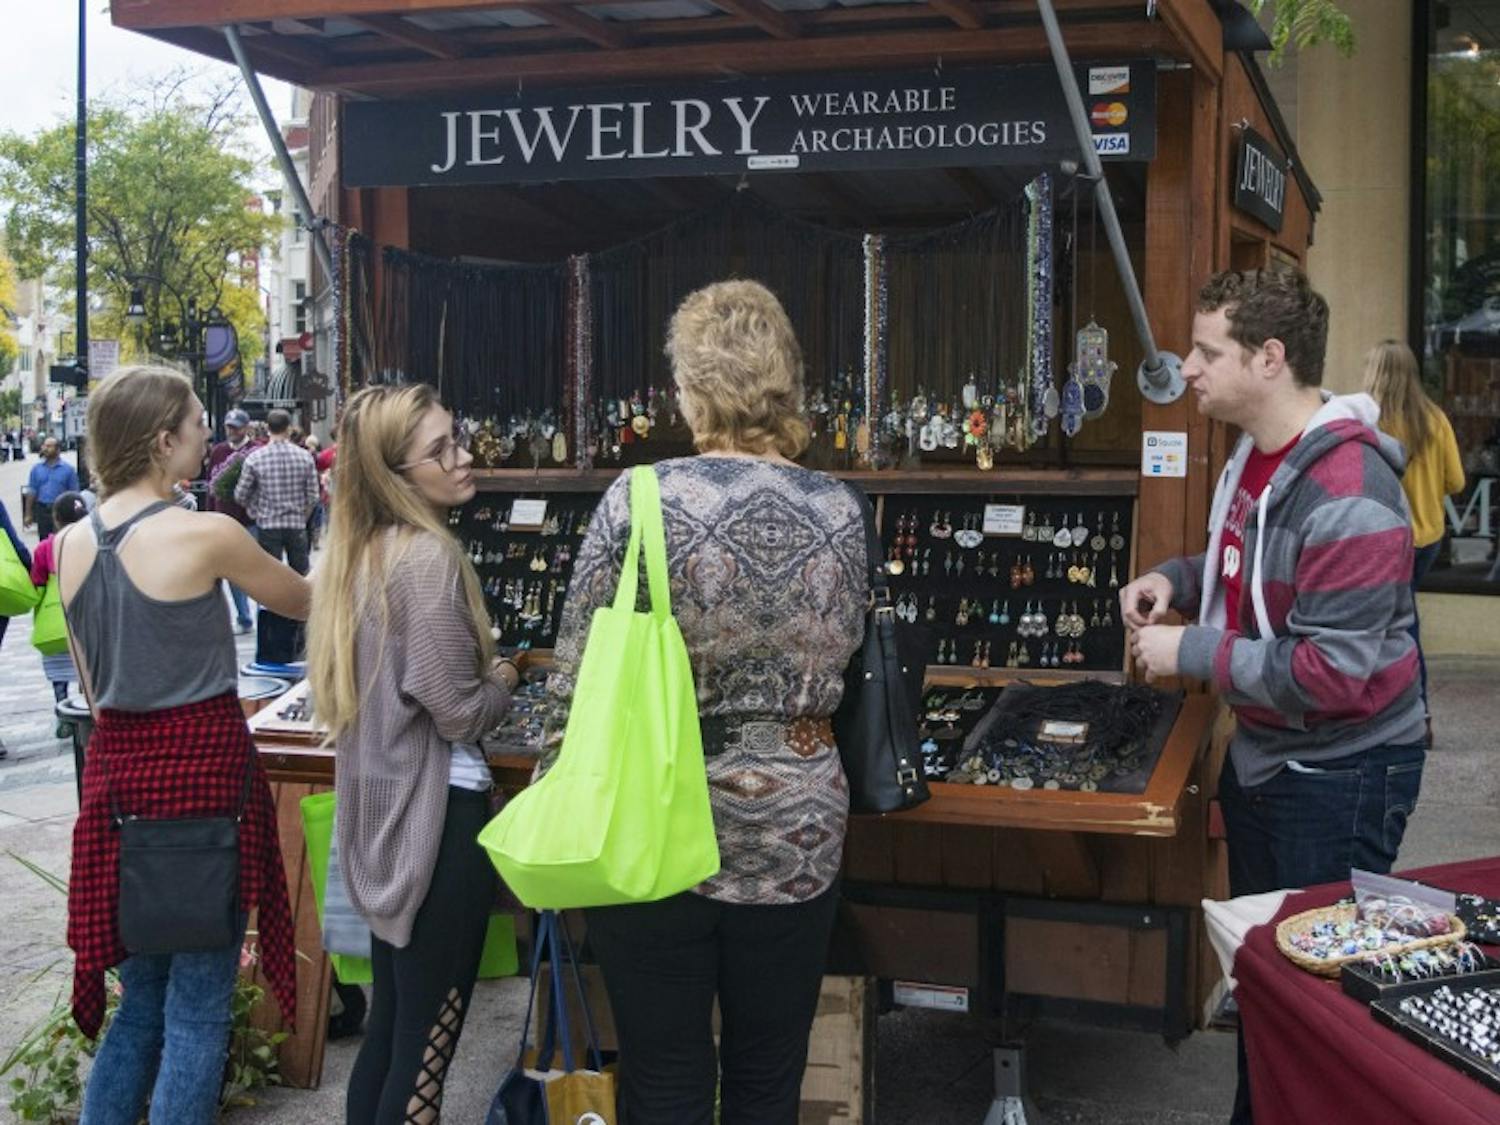 UW-Madison PhD student Jacob Hellman attempts to sell jewelry to customers at his stand Wearable Archaeologies, a job he said “doesn’t feel like a job” because of his love for it.